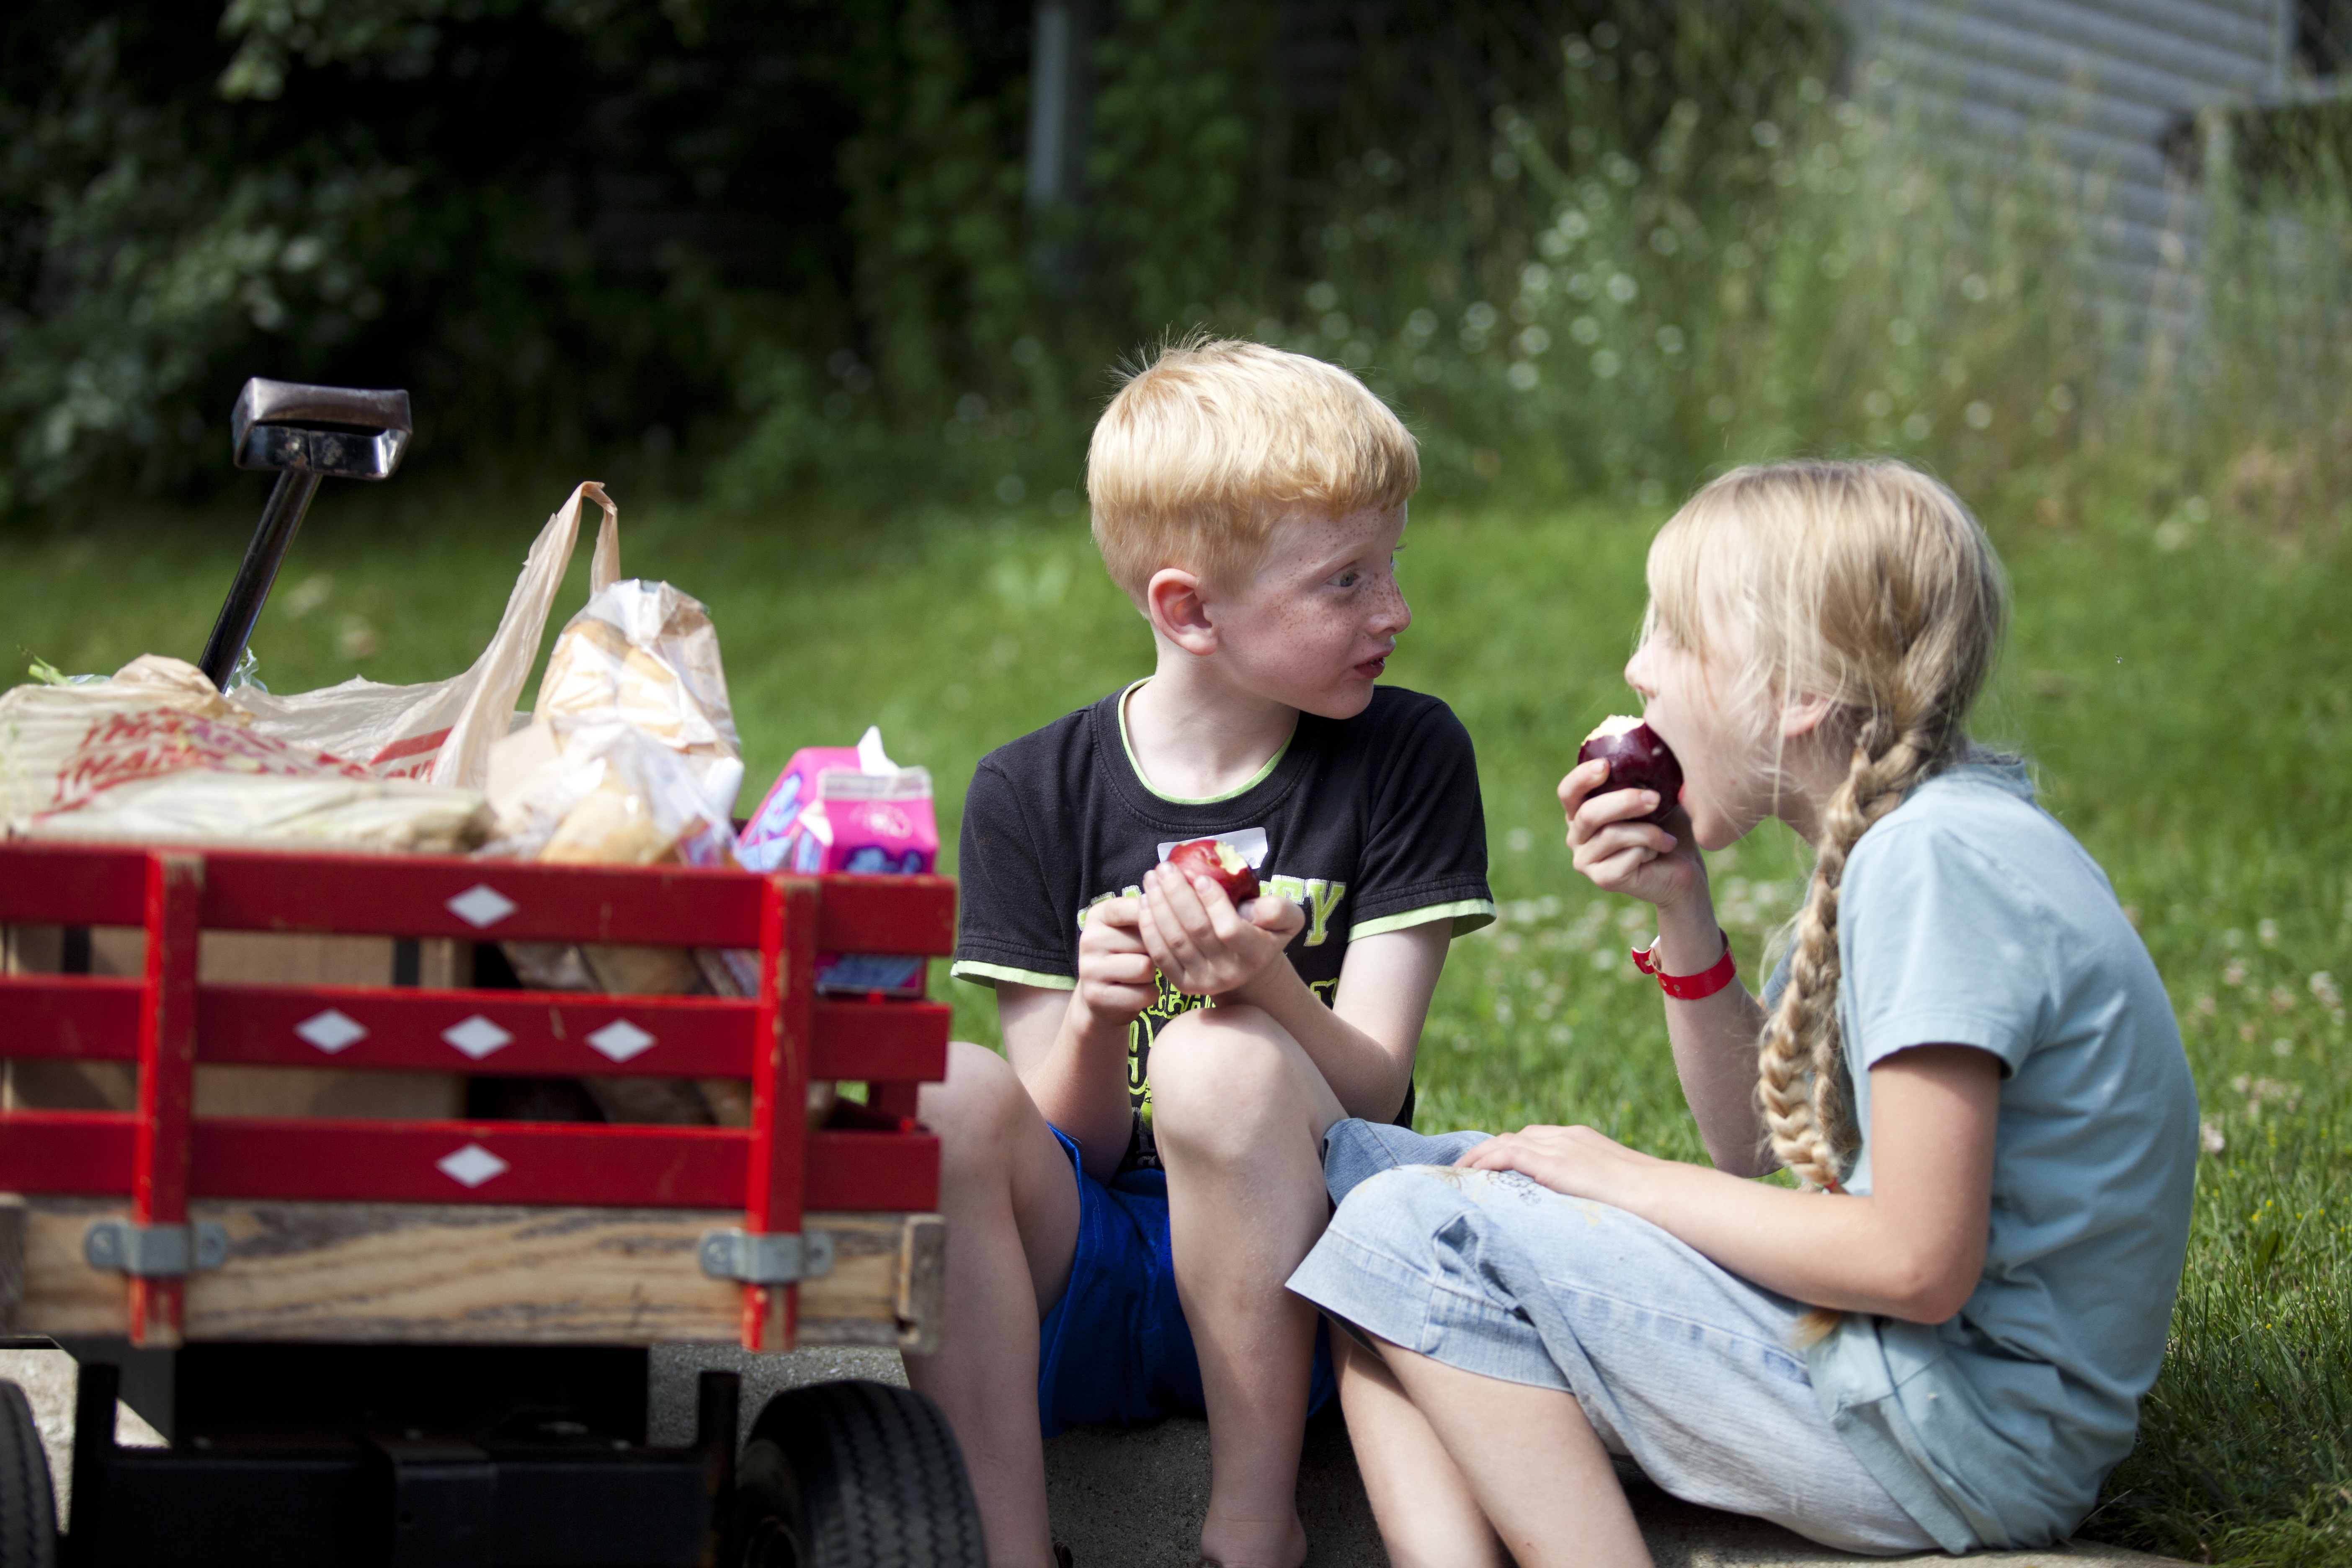 Boy and girl eating apples on a curb